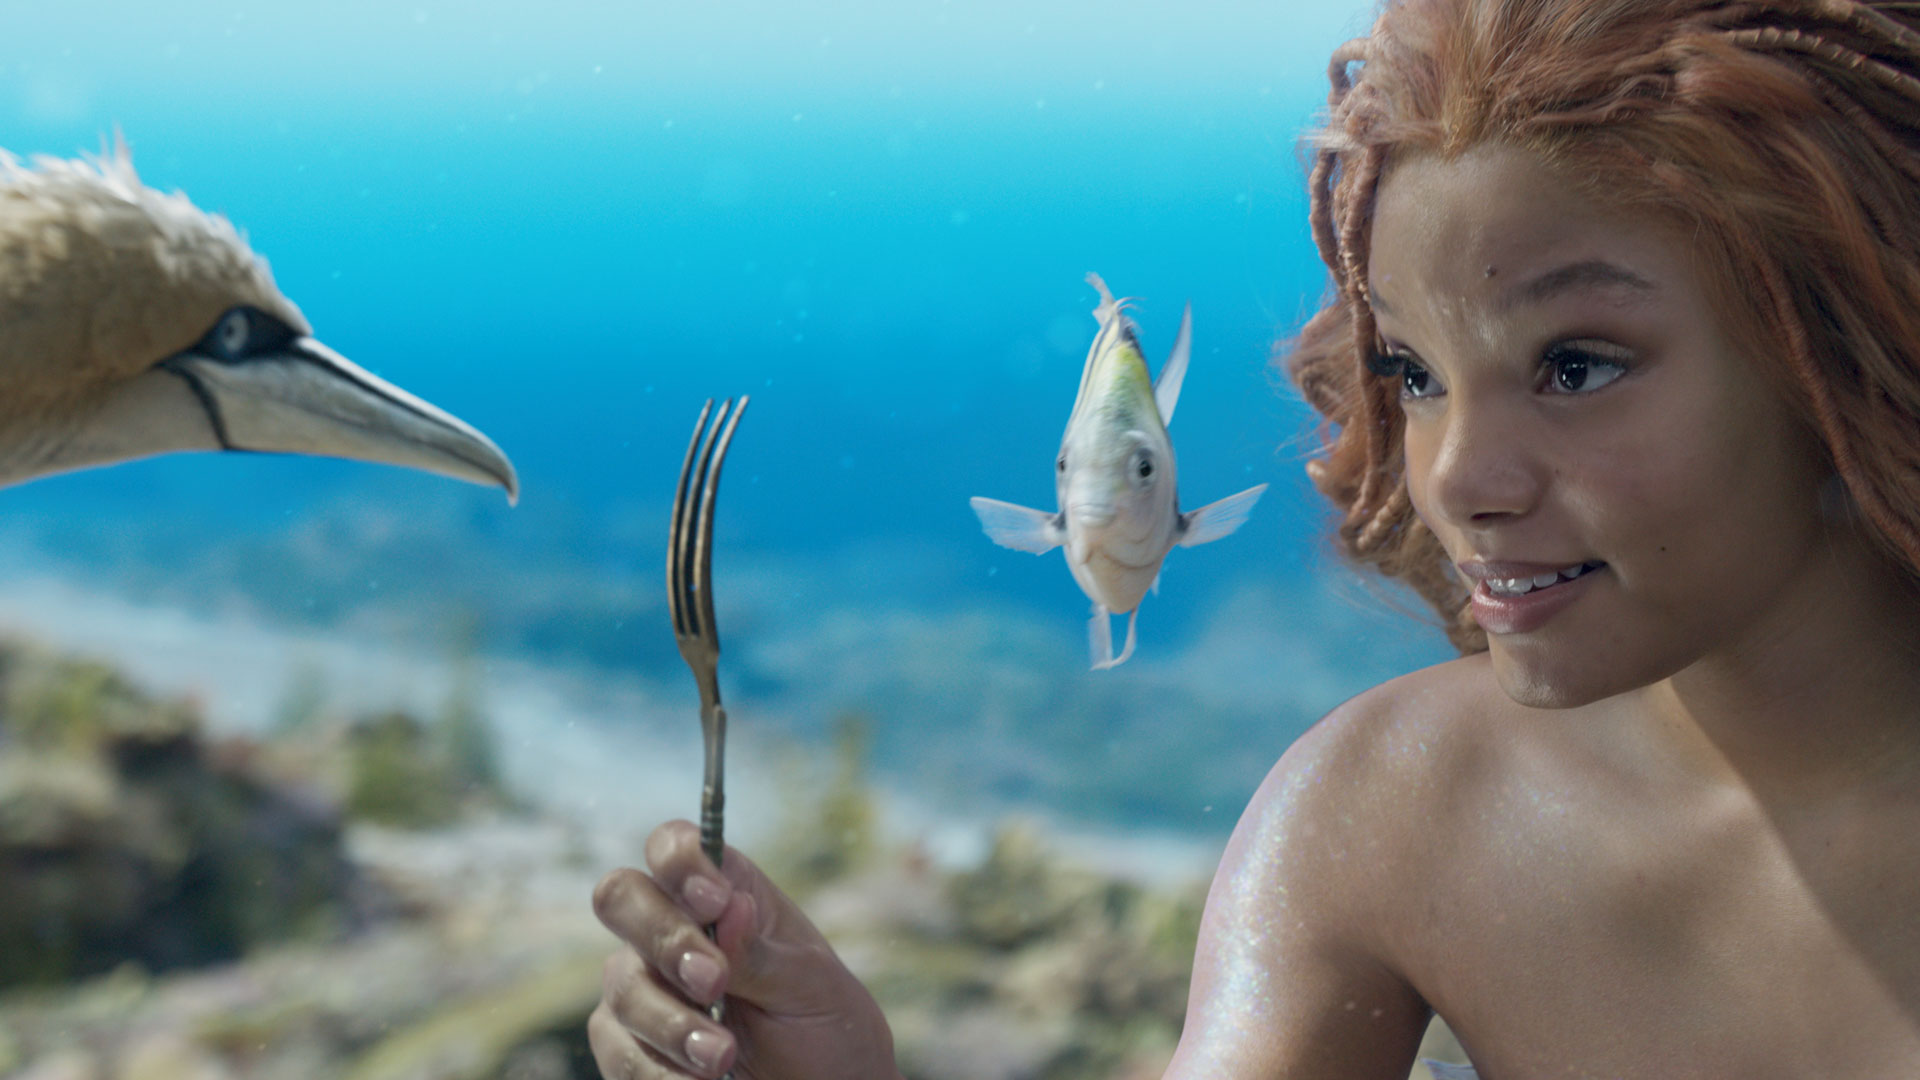 Scuttle (voiced by Awkwafina), Flounder (voiced by Jacob Tremblay), and Halle Bailey as Ariel in Disney's live-action The Little Mermaid. Photo courtesy of Disney